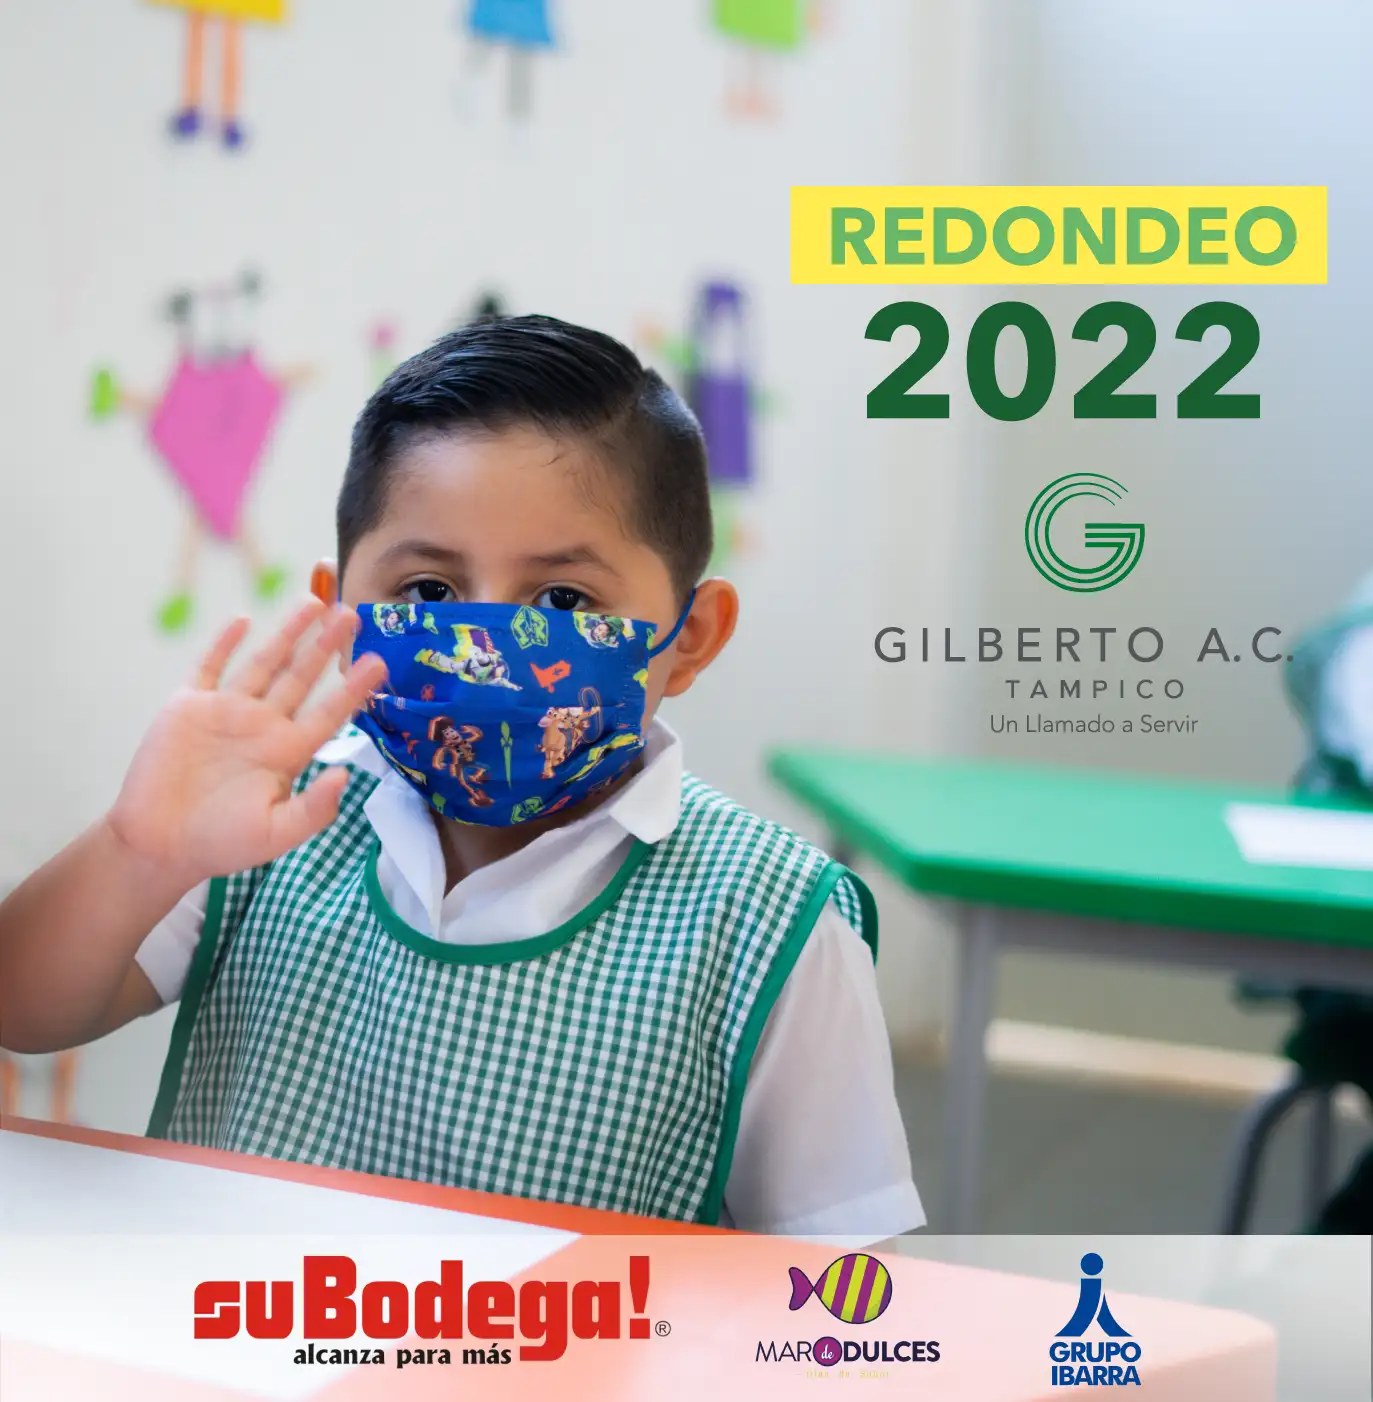 Redondeo 2022-2 Gil